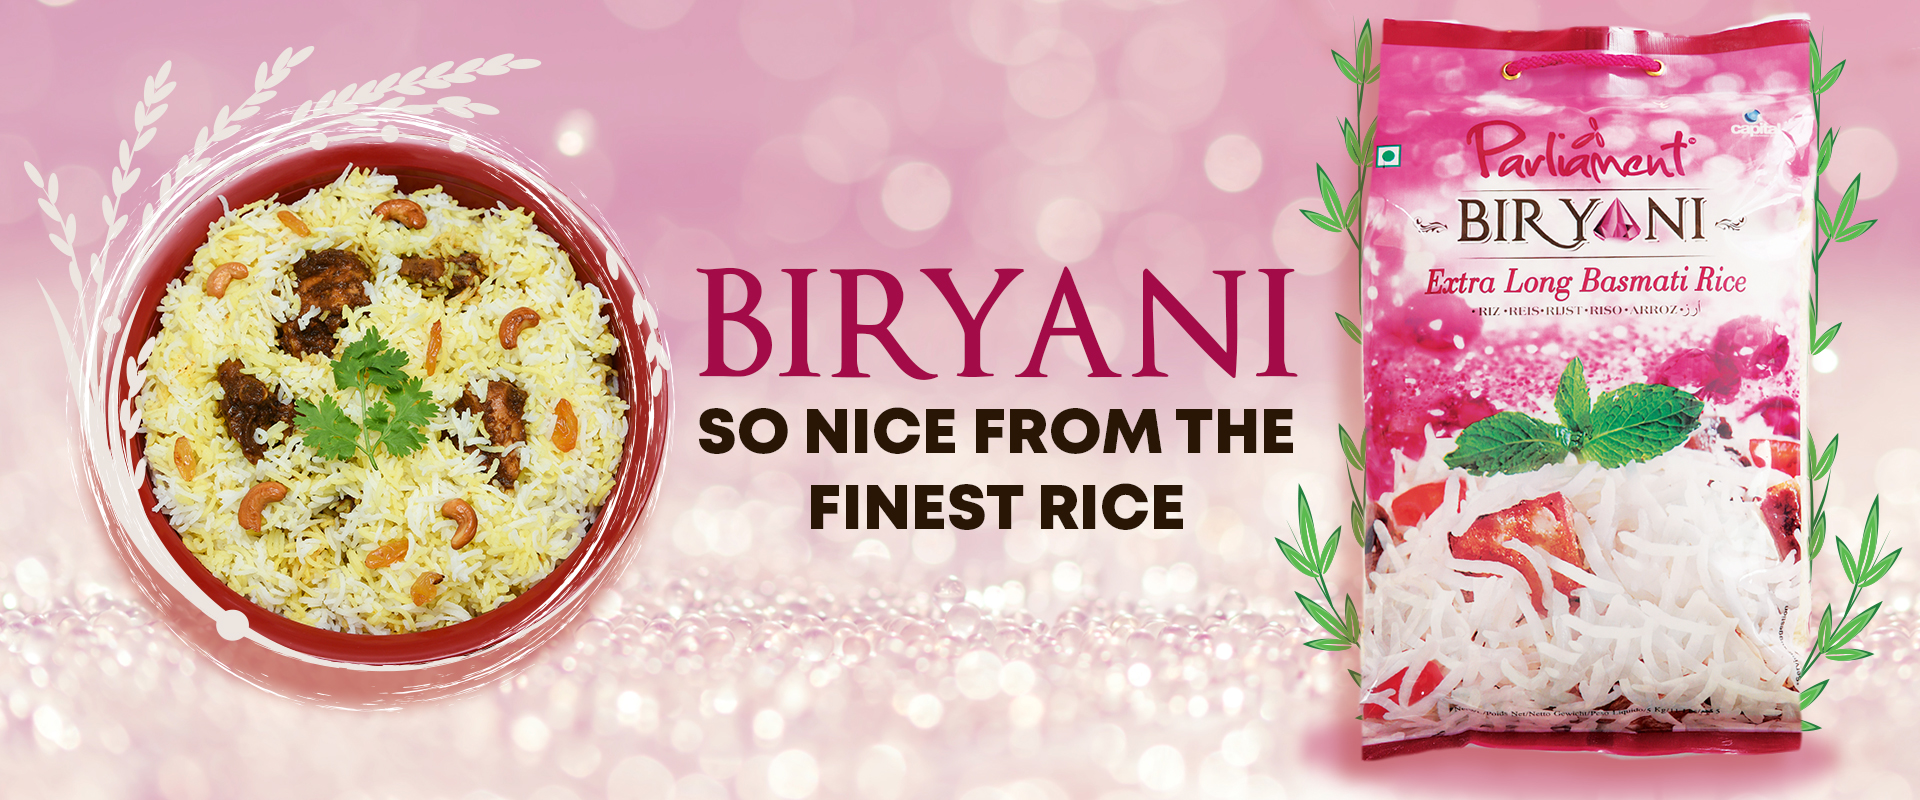 top 10 rice brands from India,Top Selling rice in the world,Top Manufacturer of rice from India,best brown rice brand in India